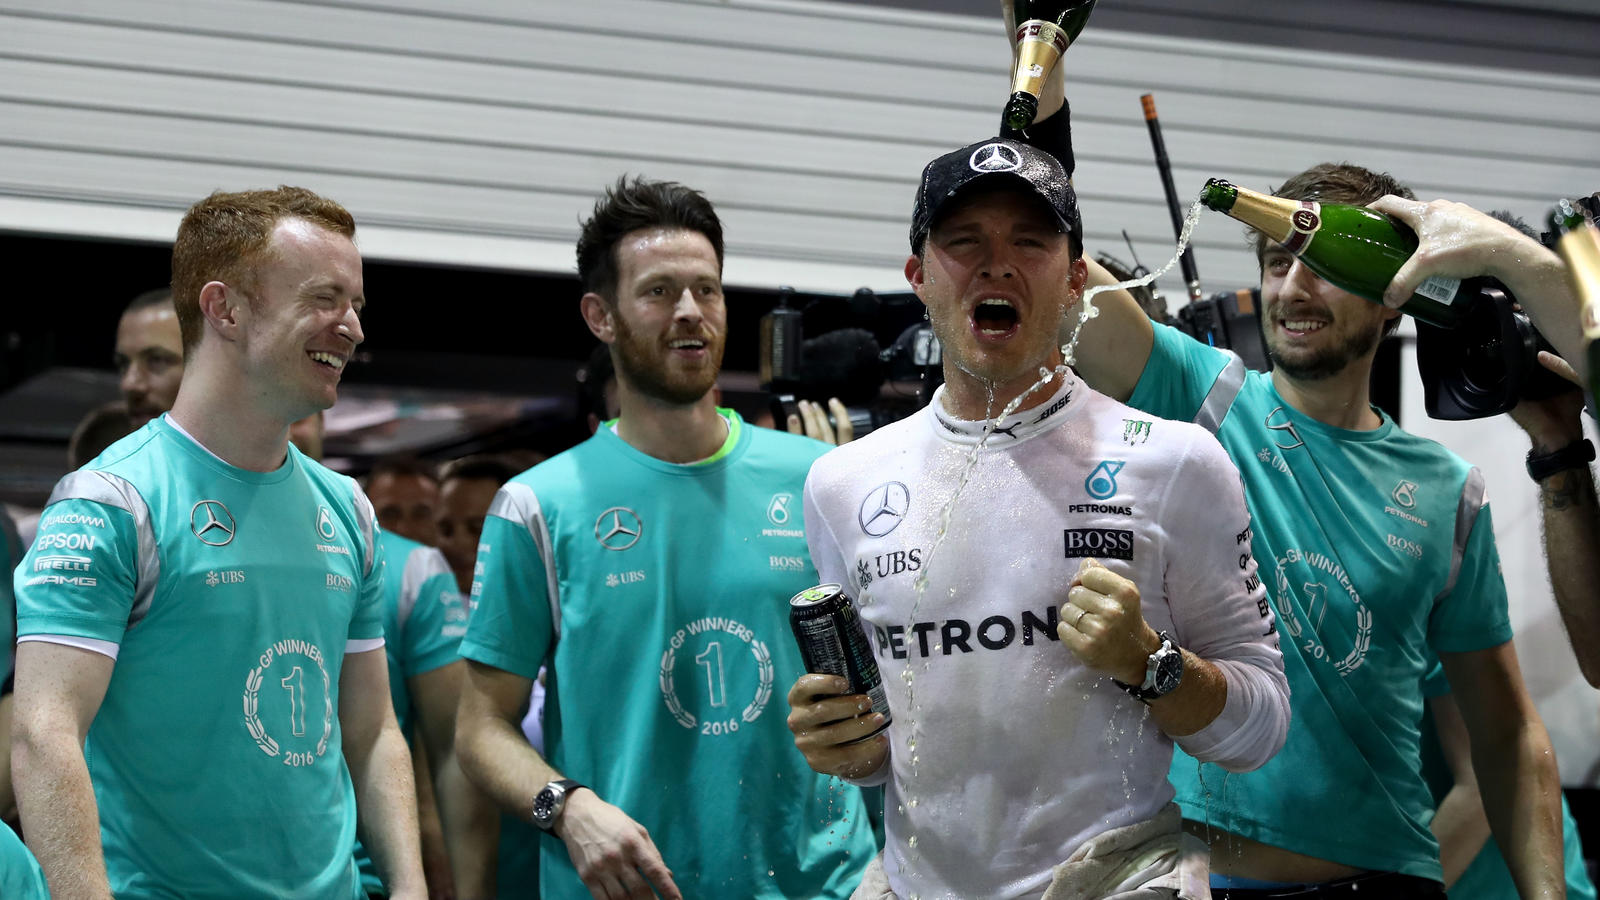 SINGAPORE - SEPTEMBER 18:  Nico Rosberg of Germany and Mercedes GP celebrates his win with his team  during the Formula One Grand Prix of Singapore at Marina Bay Street Circuit on September 18, 2016 in Singapore.  (Photo by Lars Baron/Getty Images)